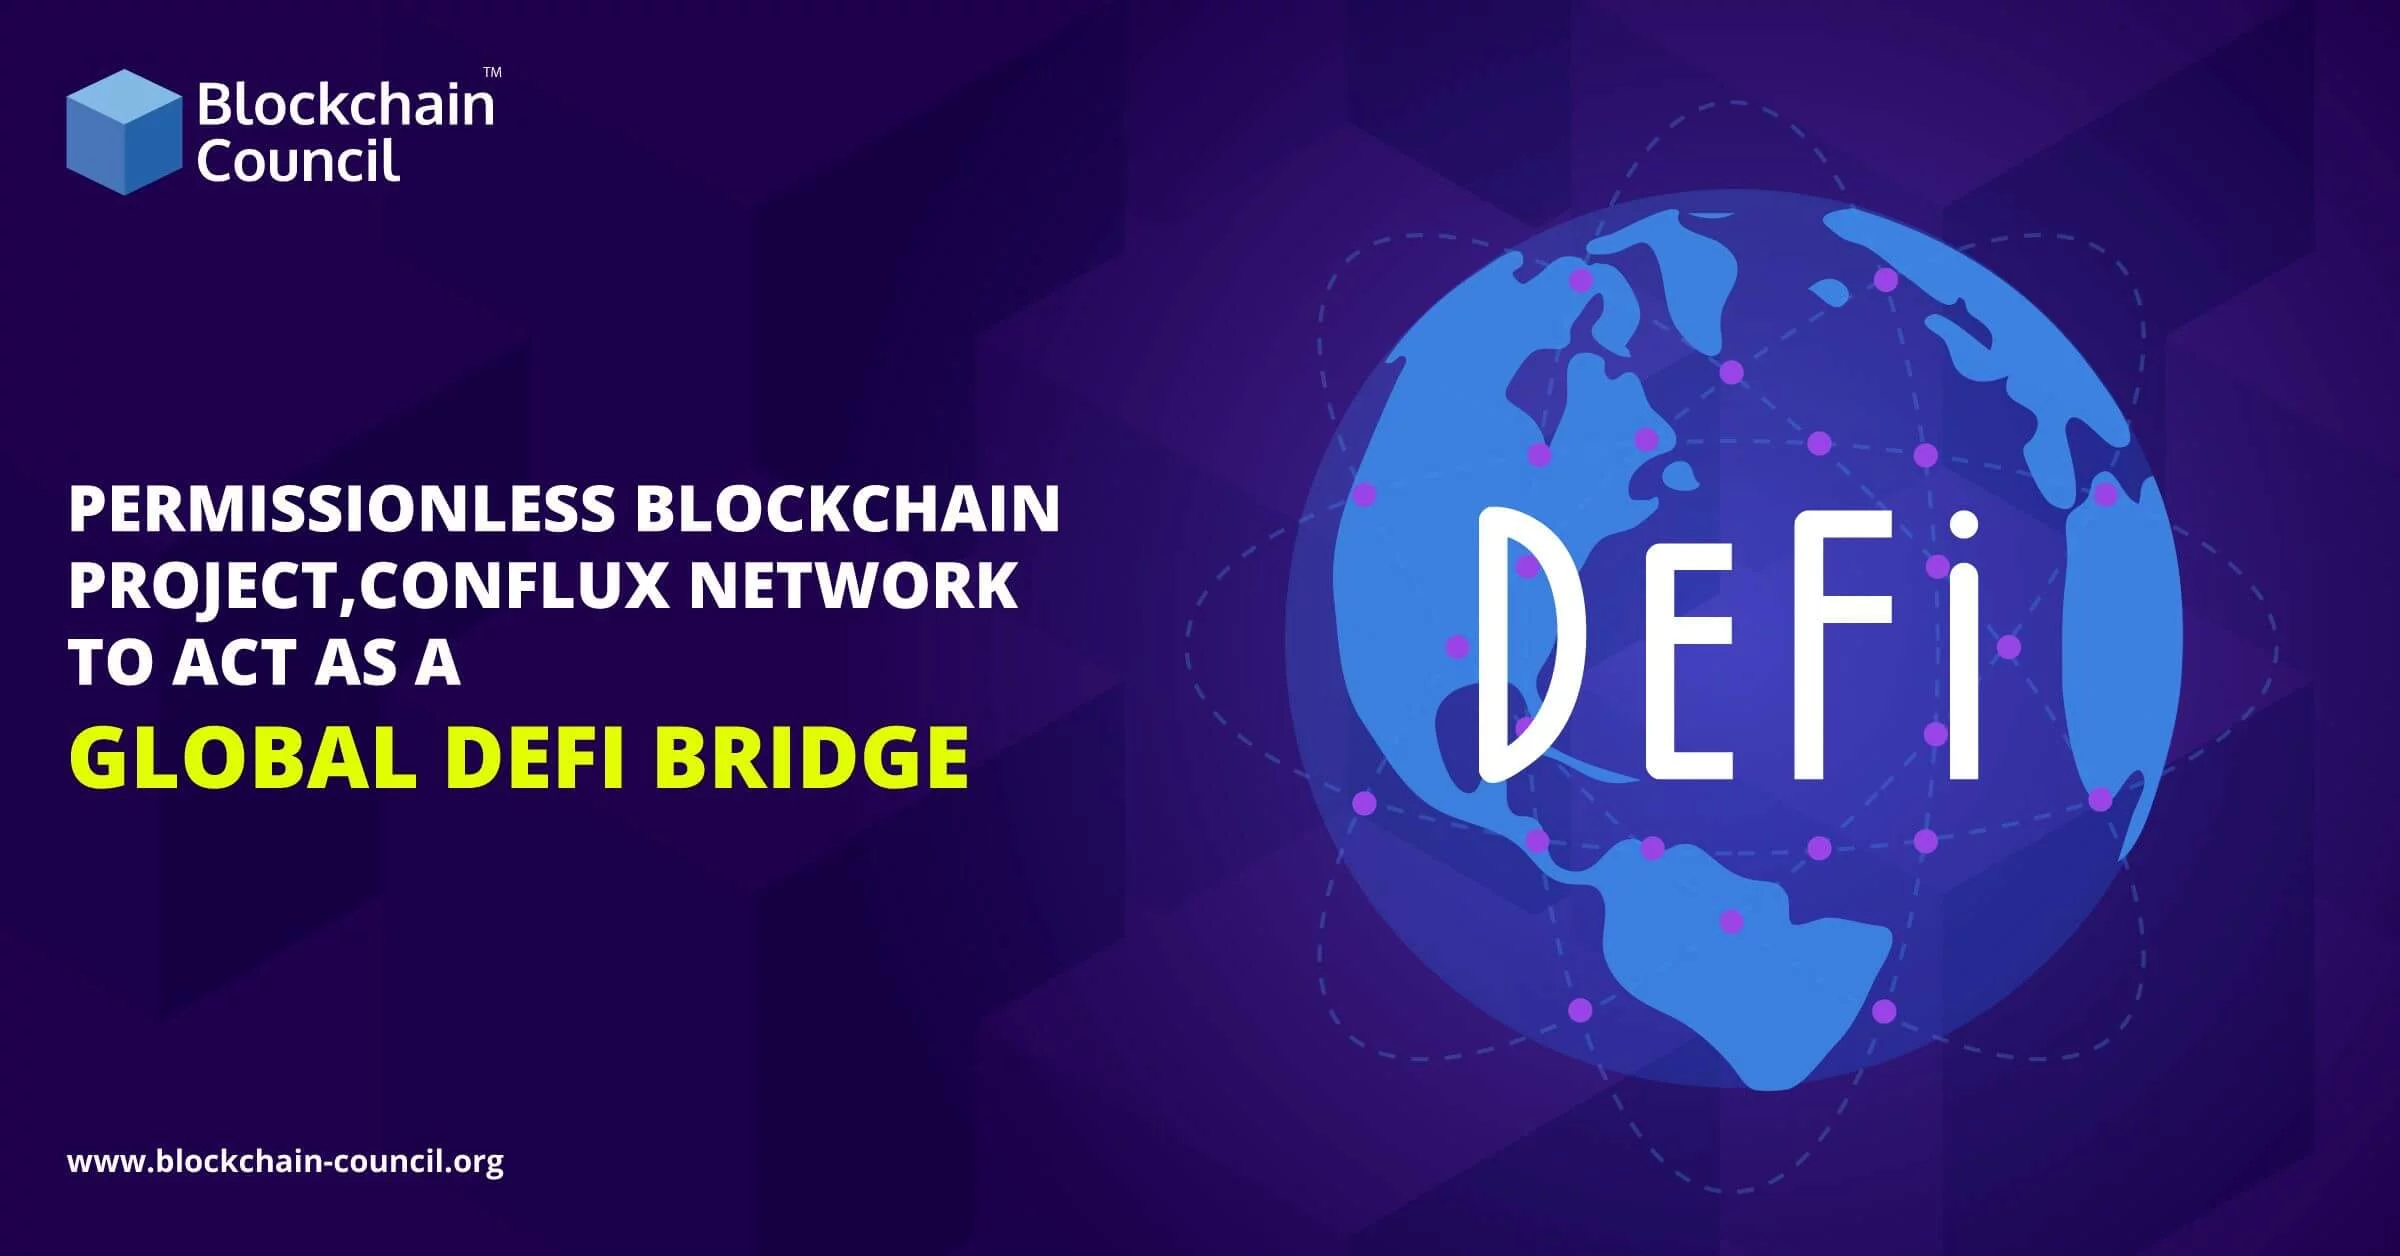 Permissionless Blockchain Project, Conflux Network to Act as a Global DeFi Bridge